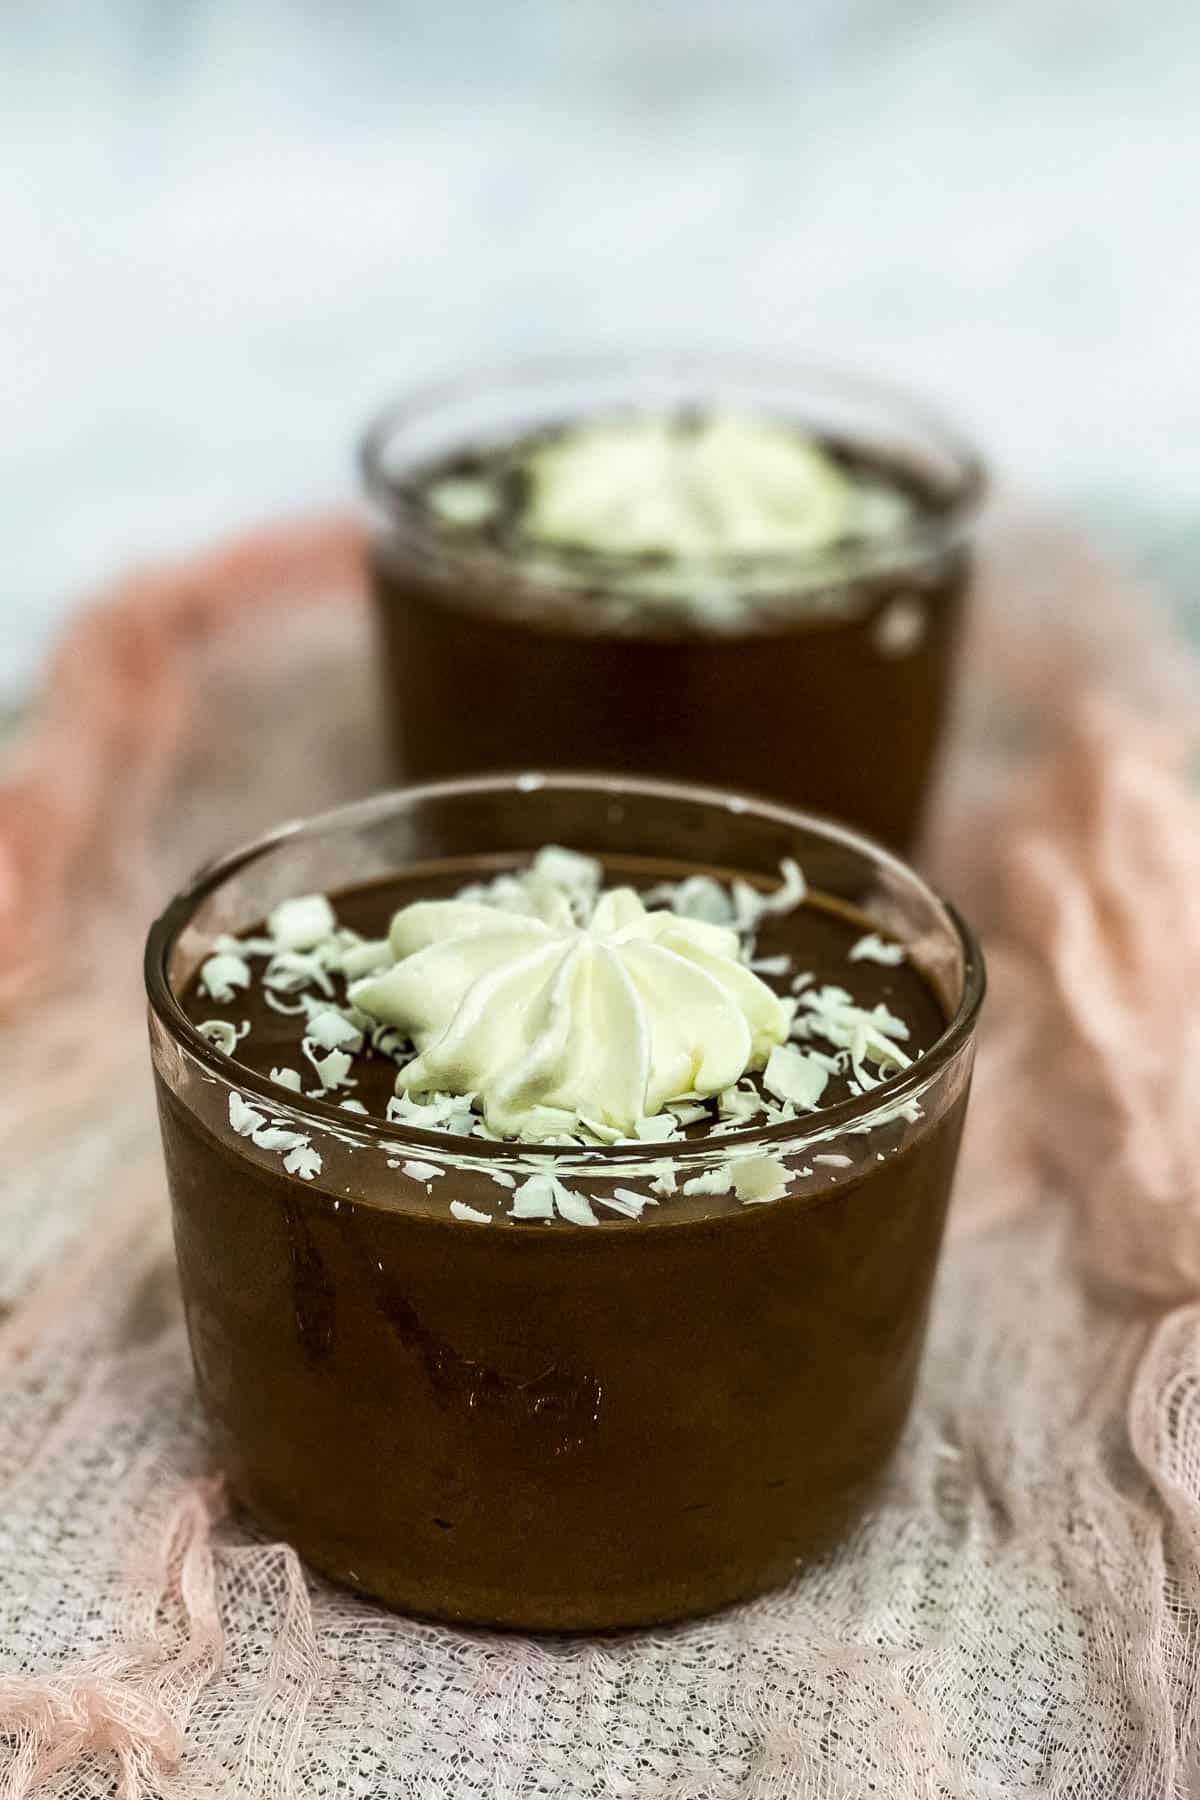 2 cups of mascarpone chocolate mousse with white chocolate topping.